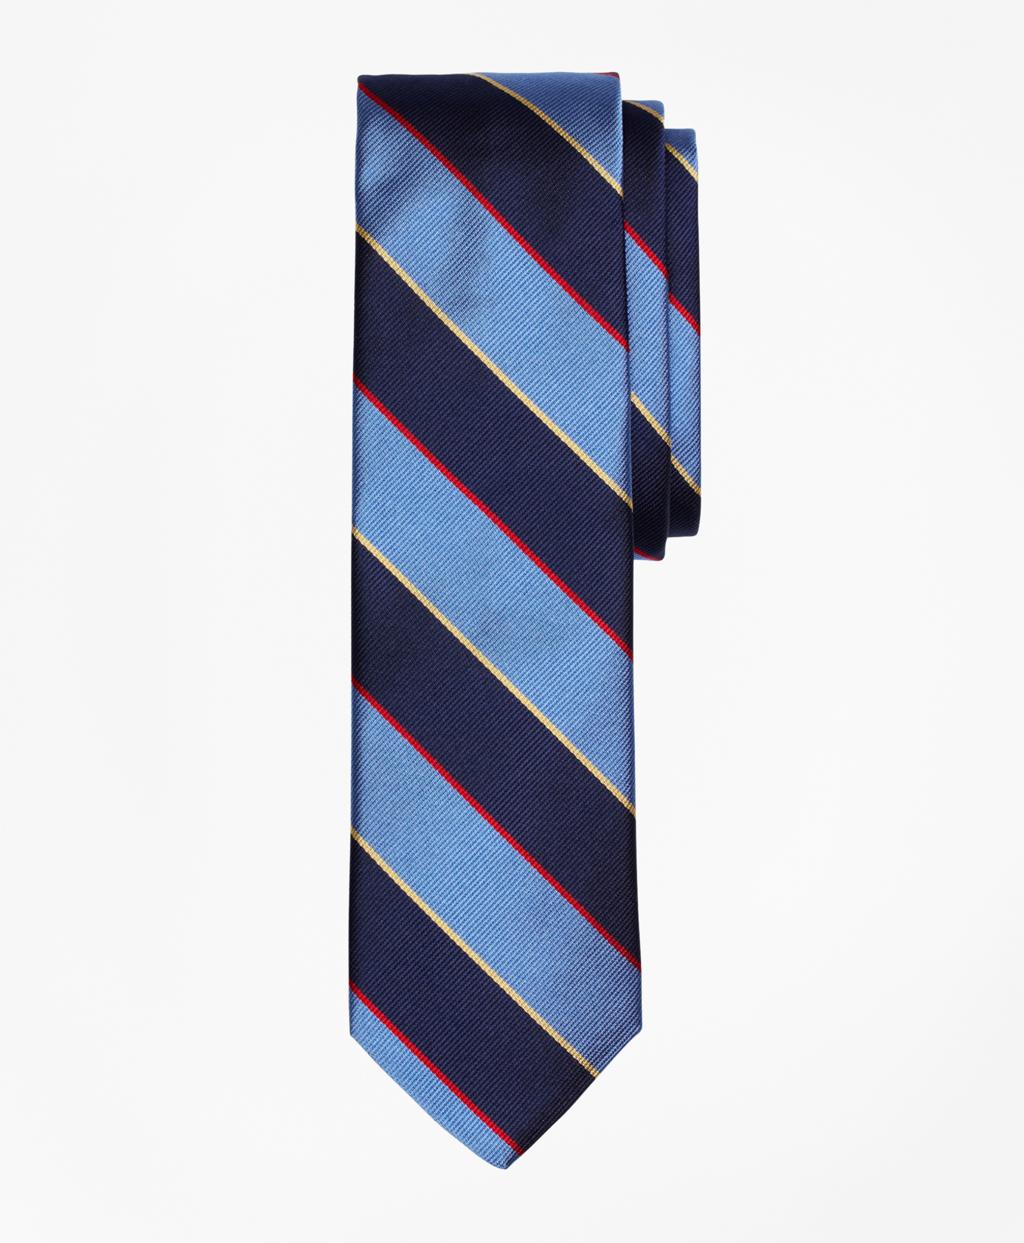 Lyst - Brooks Brothers Argyle Sutherland Rep Slim Tie in Blue for Men